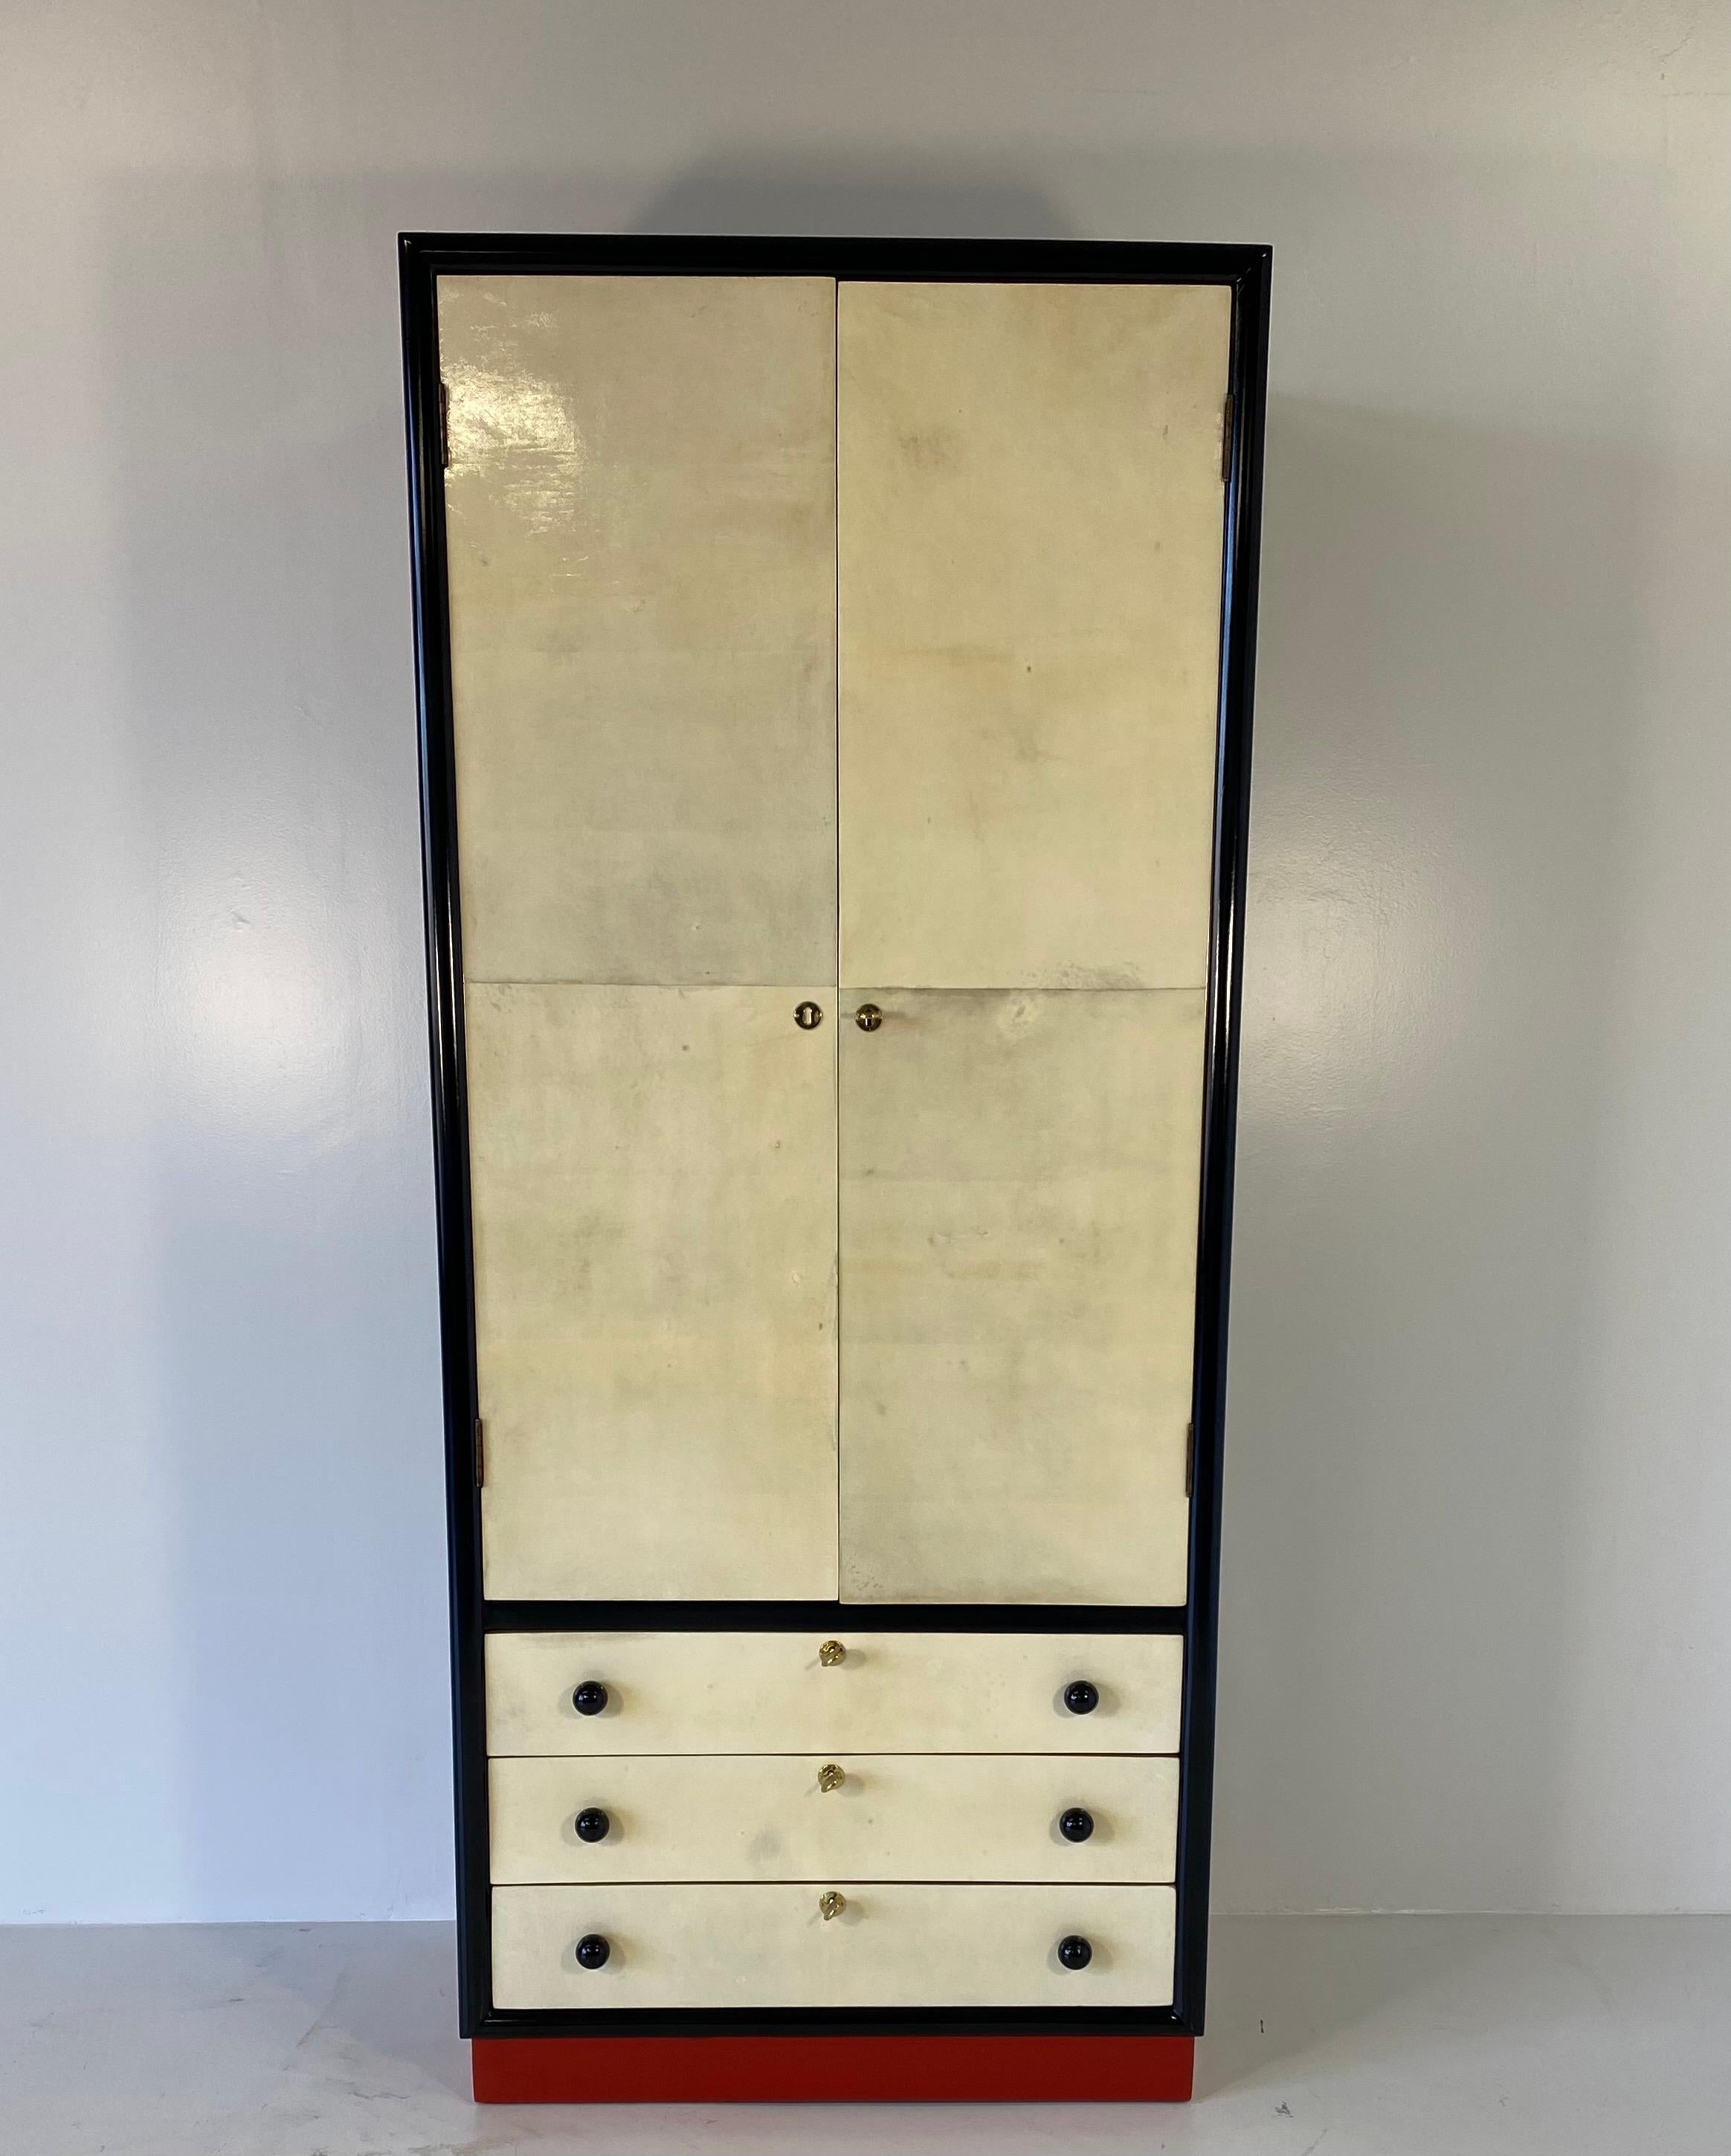 This precious and particular small wardrobe was produced in the 1930s in Italy.
The front of the doors and the drawers are covered in parchment while the structure is black lacquered.
The base is in red lacquer, the knobs are in turned solid